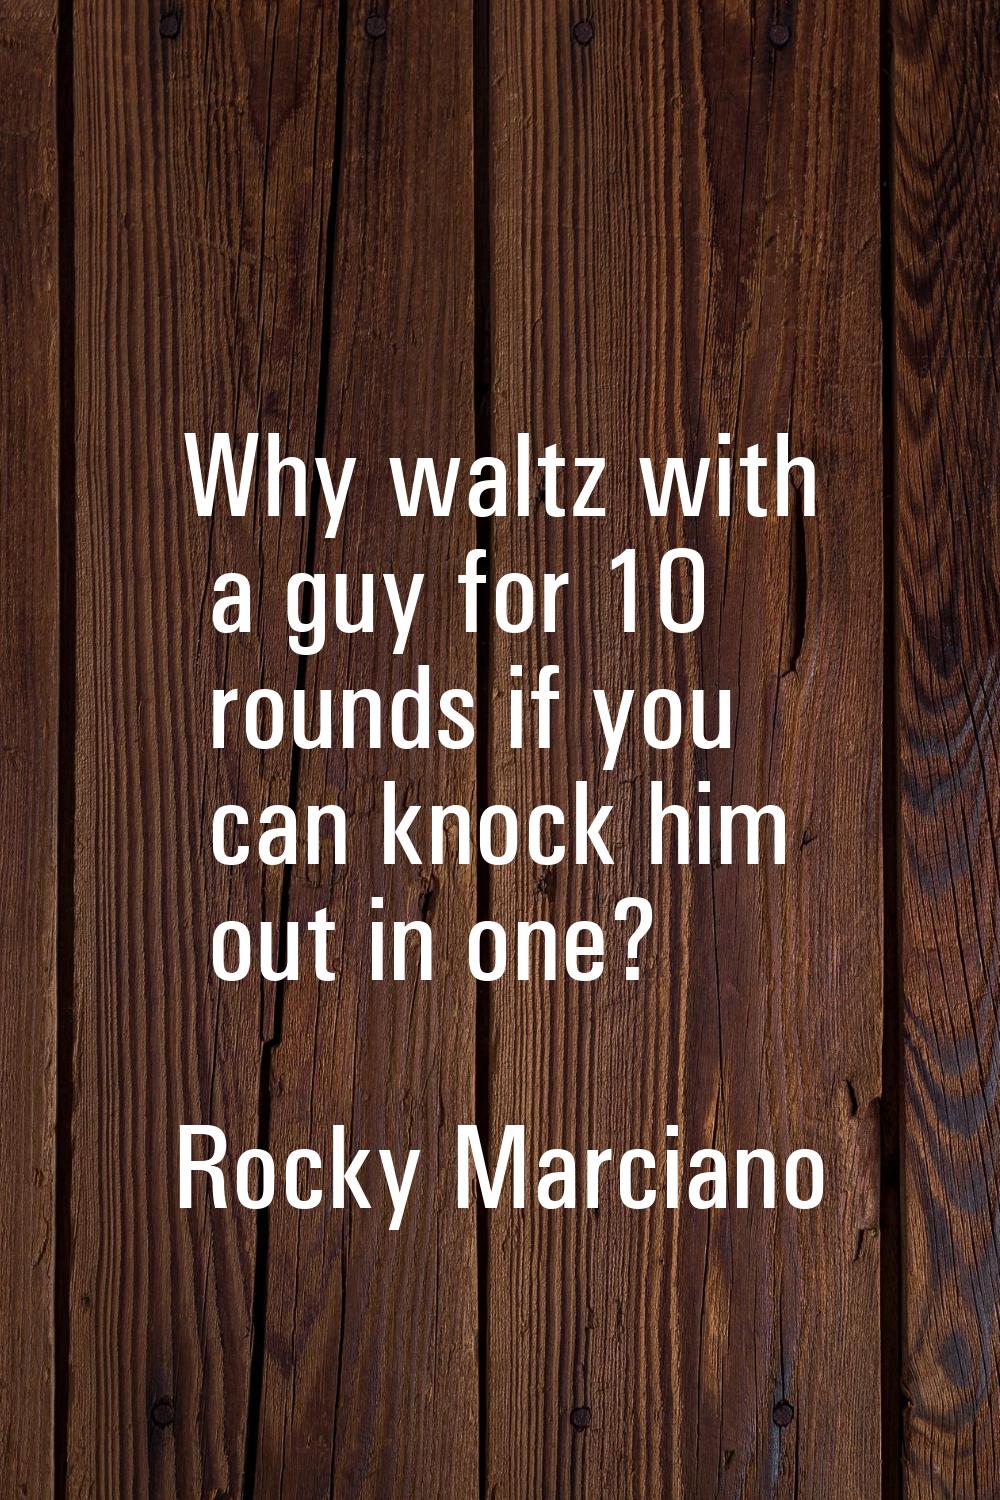 Why waltz with a guy for 10 rounds if you can knock him out in one?